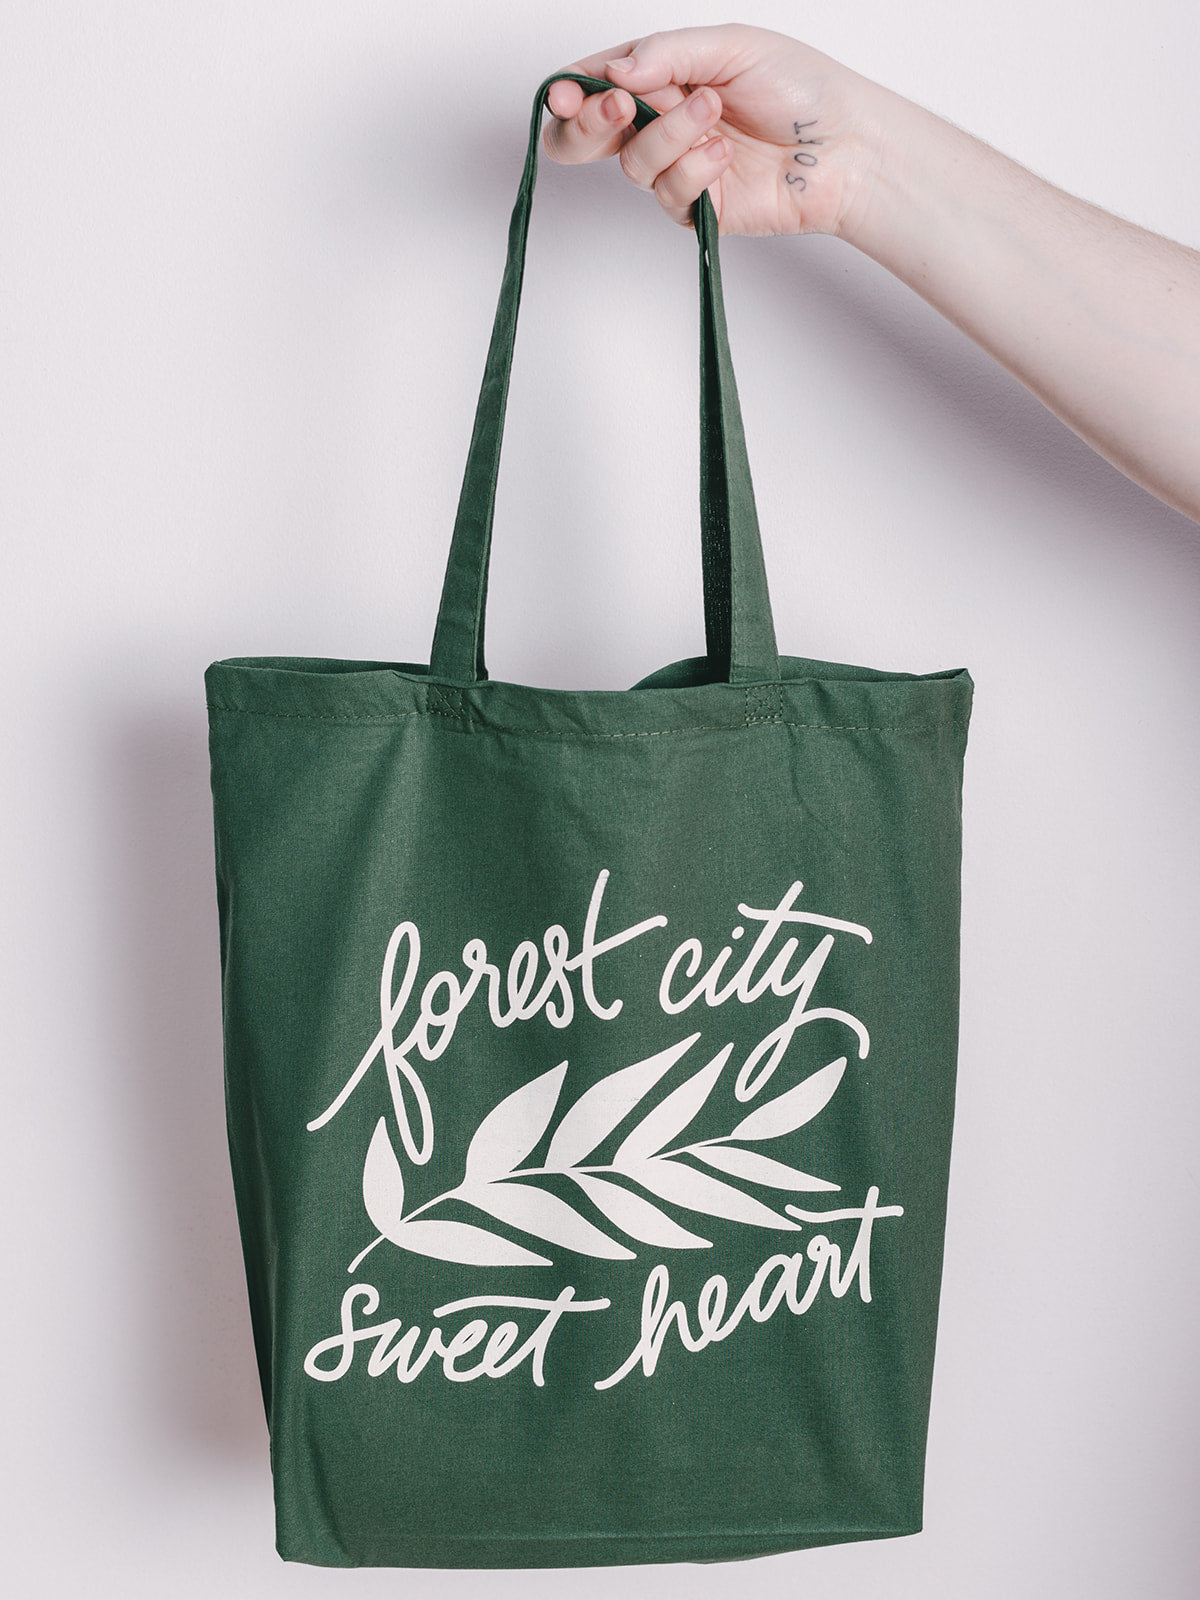 forest city sweetheart tote bag